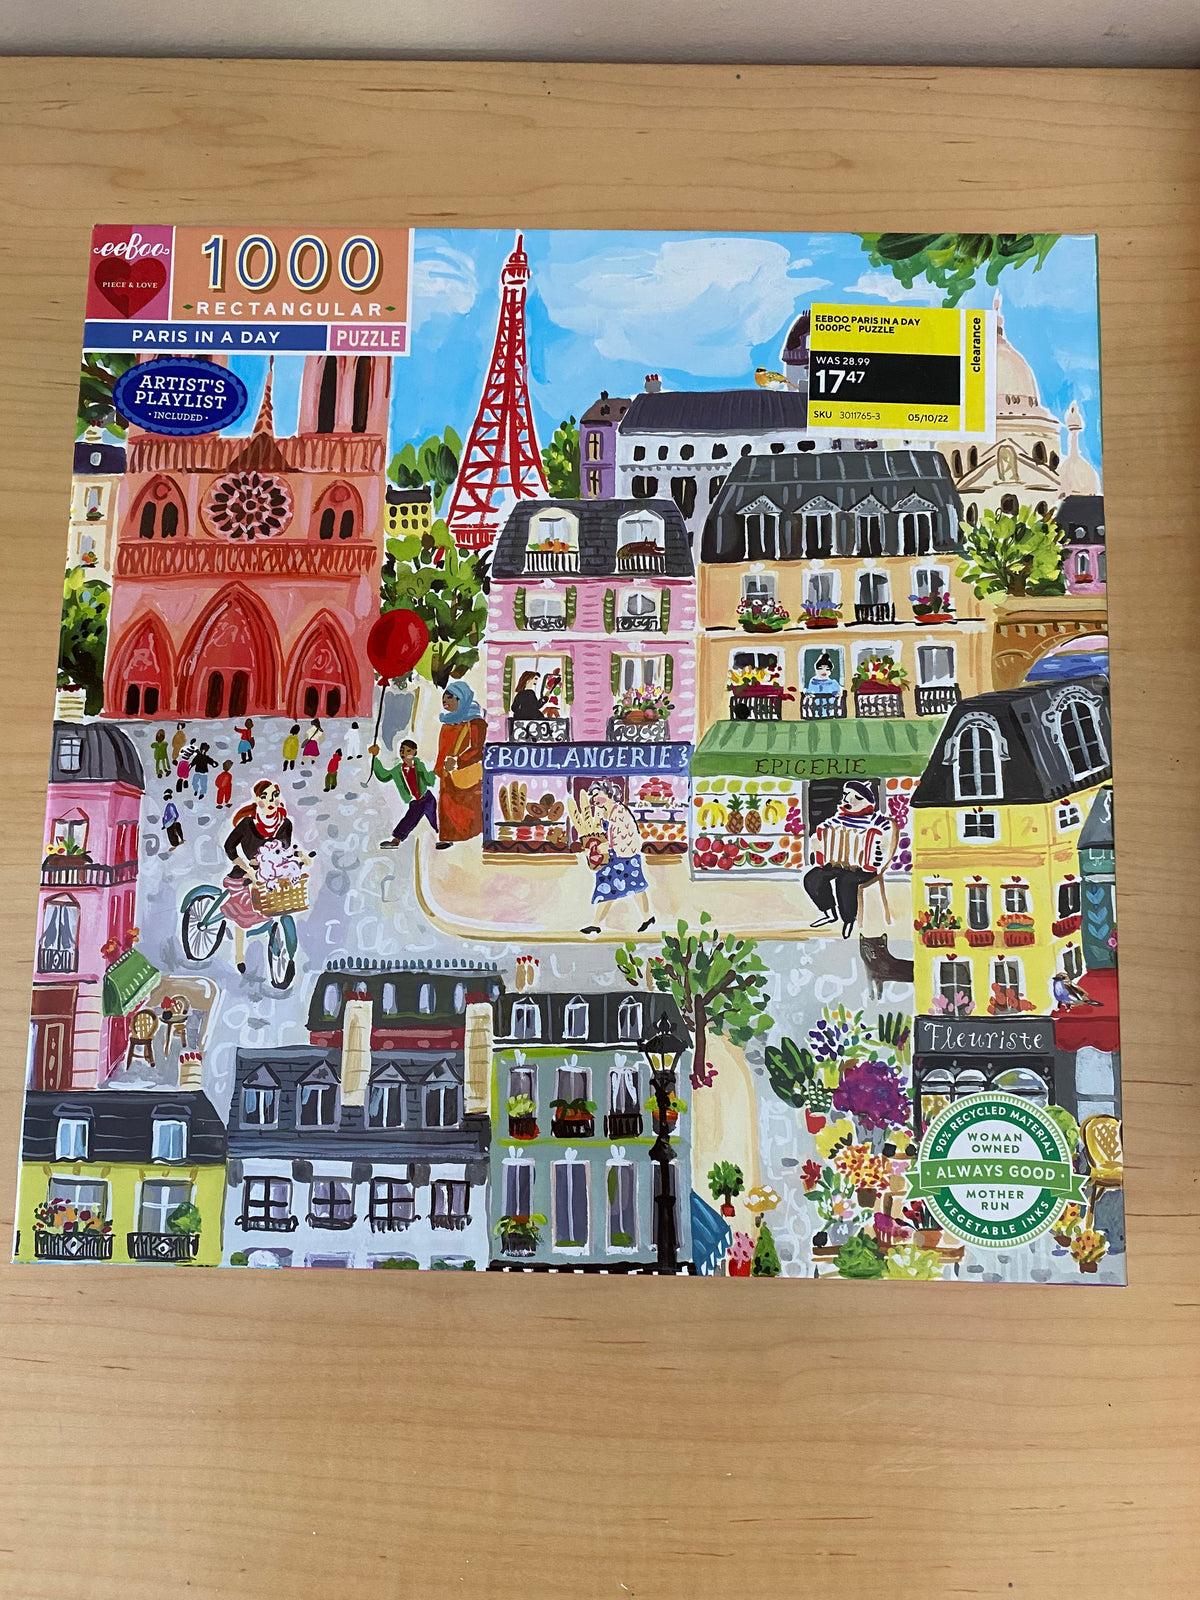 PARIS IN A DAY PUZZLE